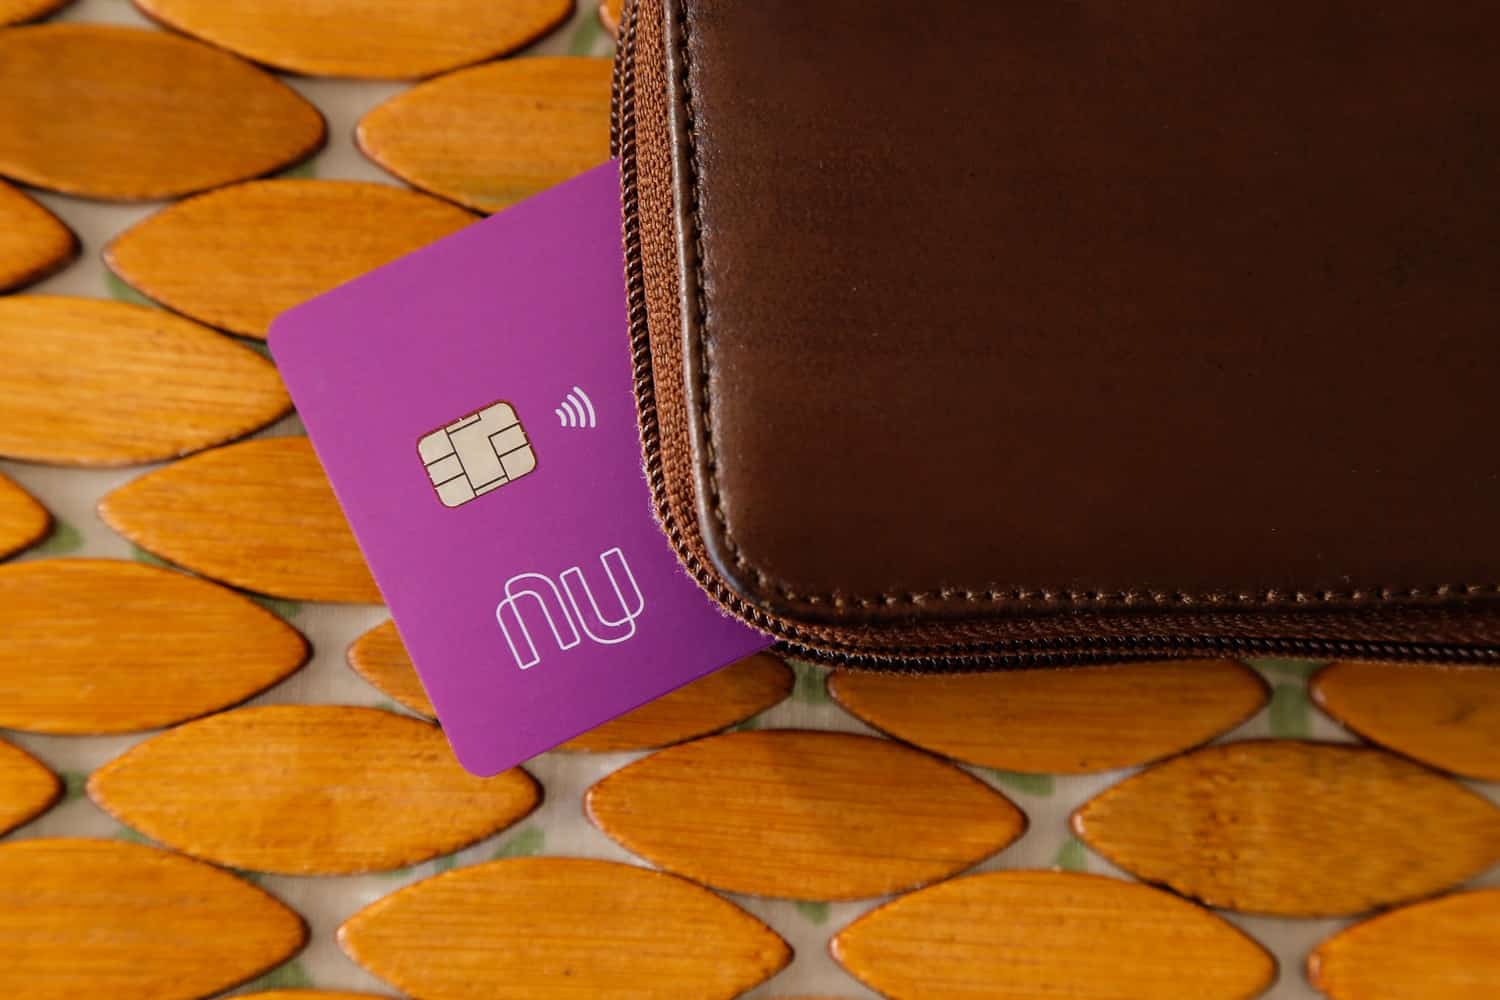 A Nubank bank card protrudes from a brown leather wallet.